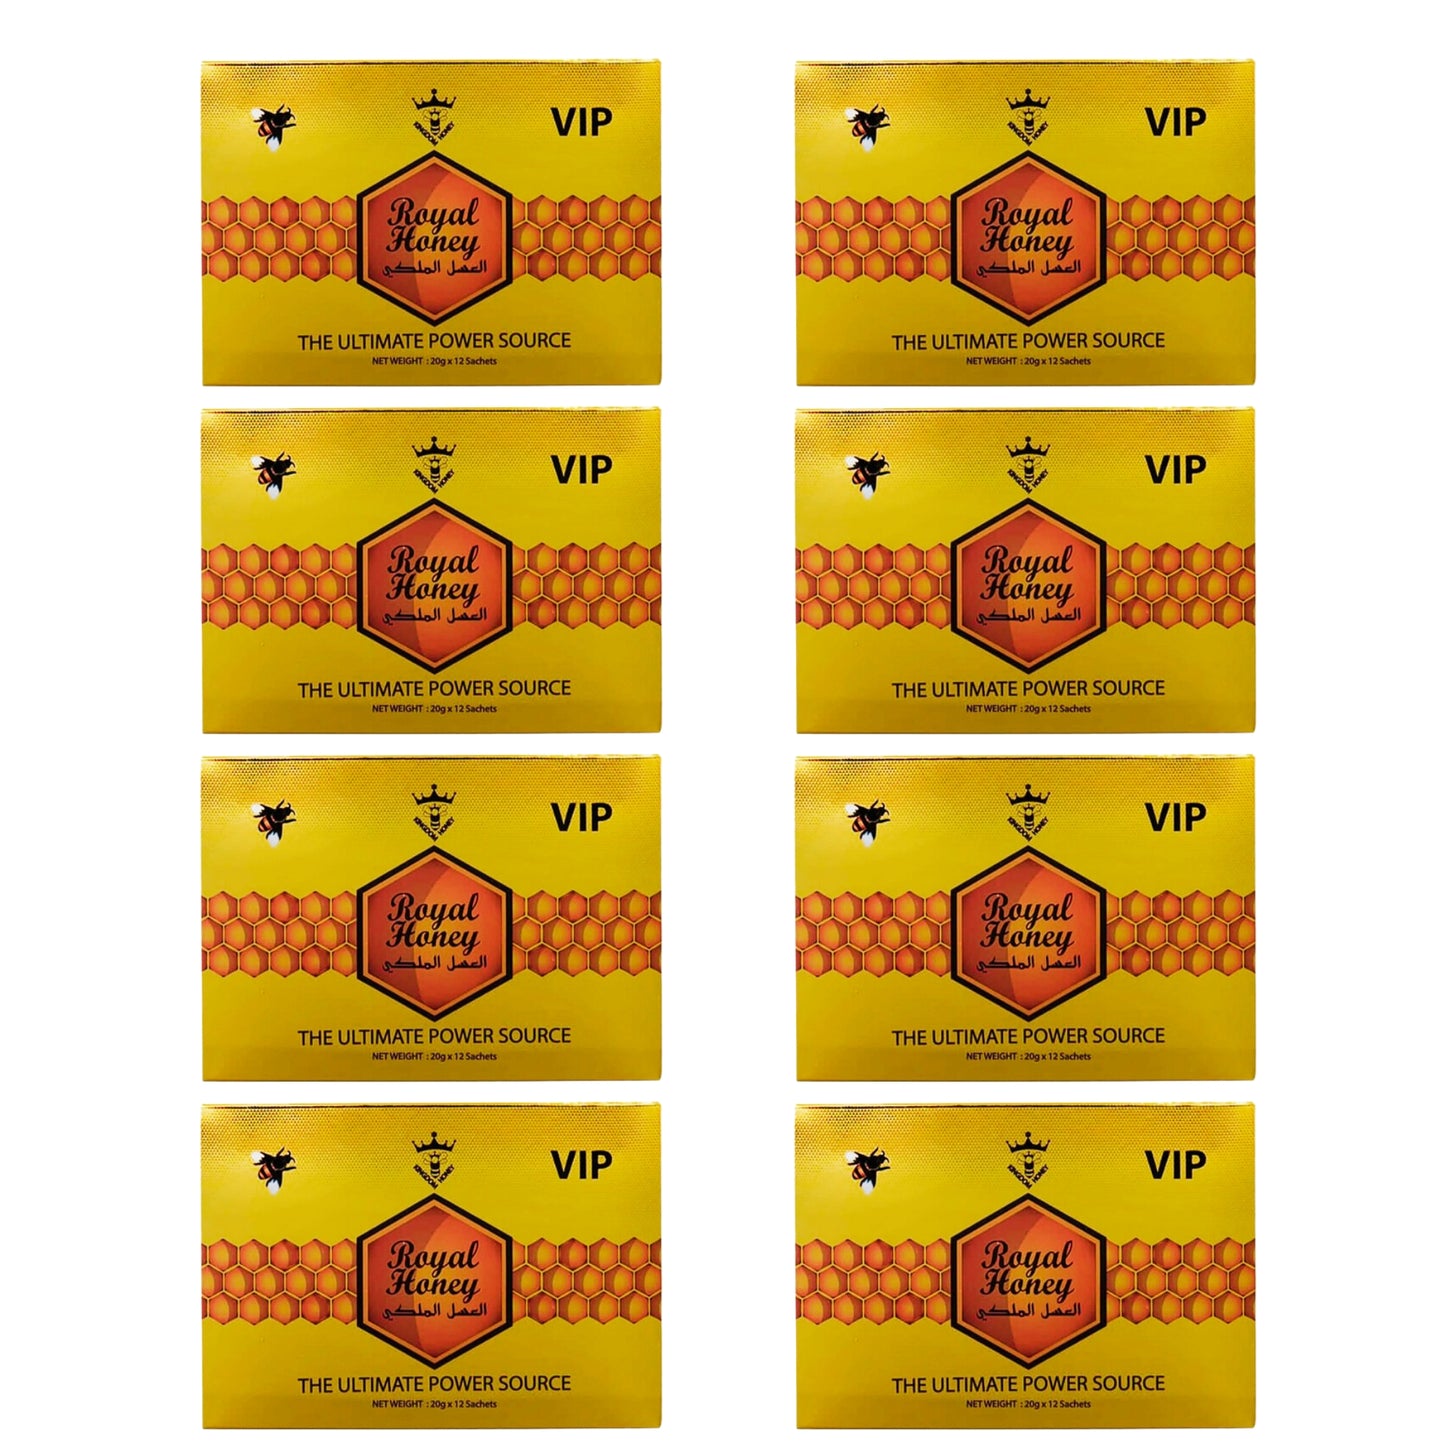 VIP Royal Kingdom Honey |The Ultimate Power Source | pack of 12